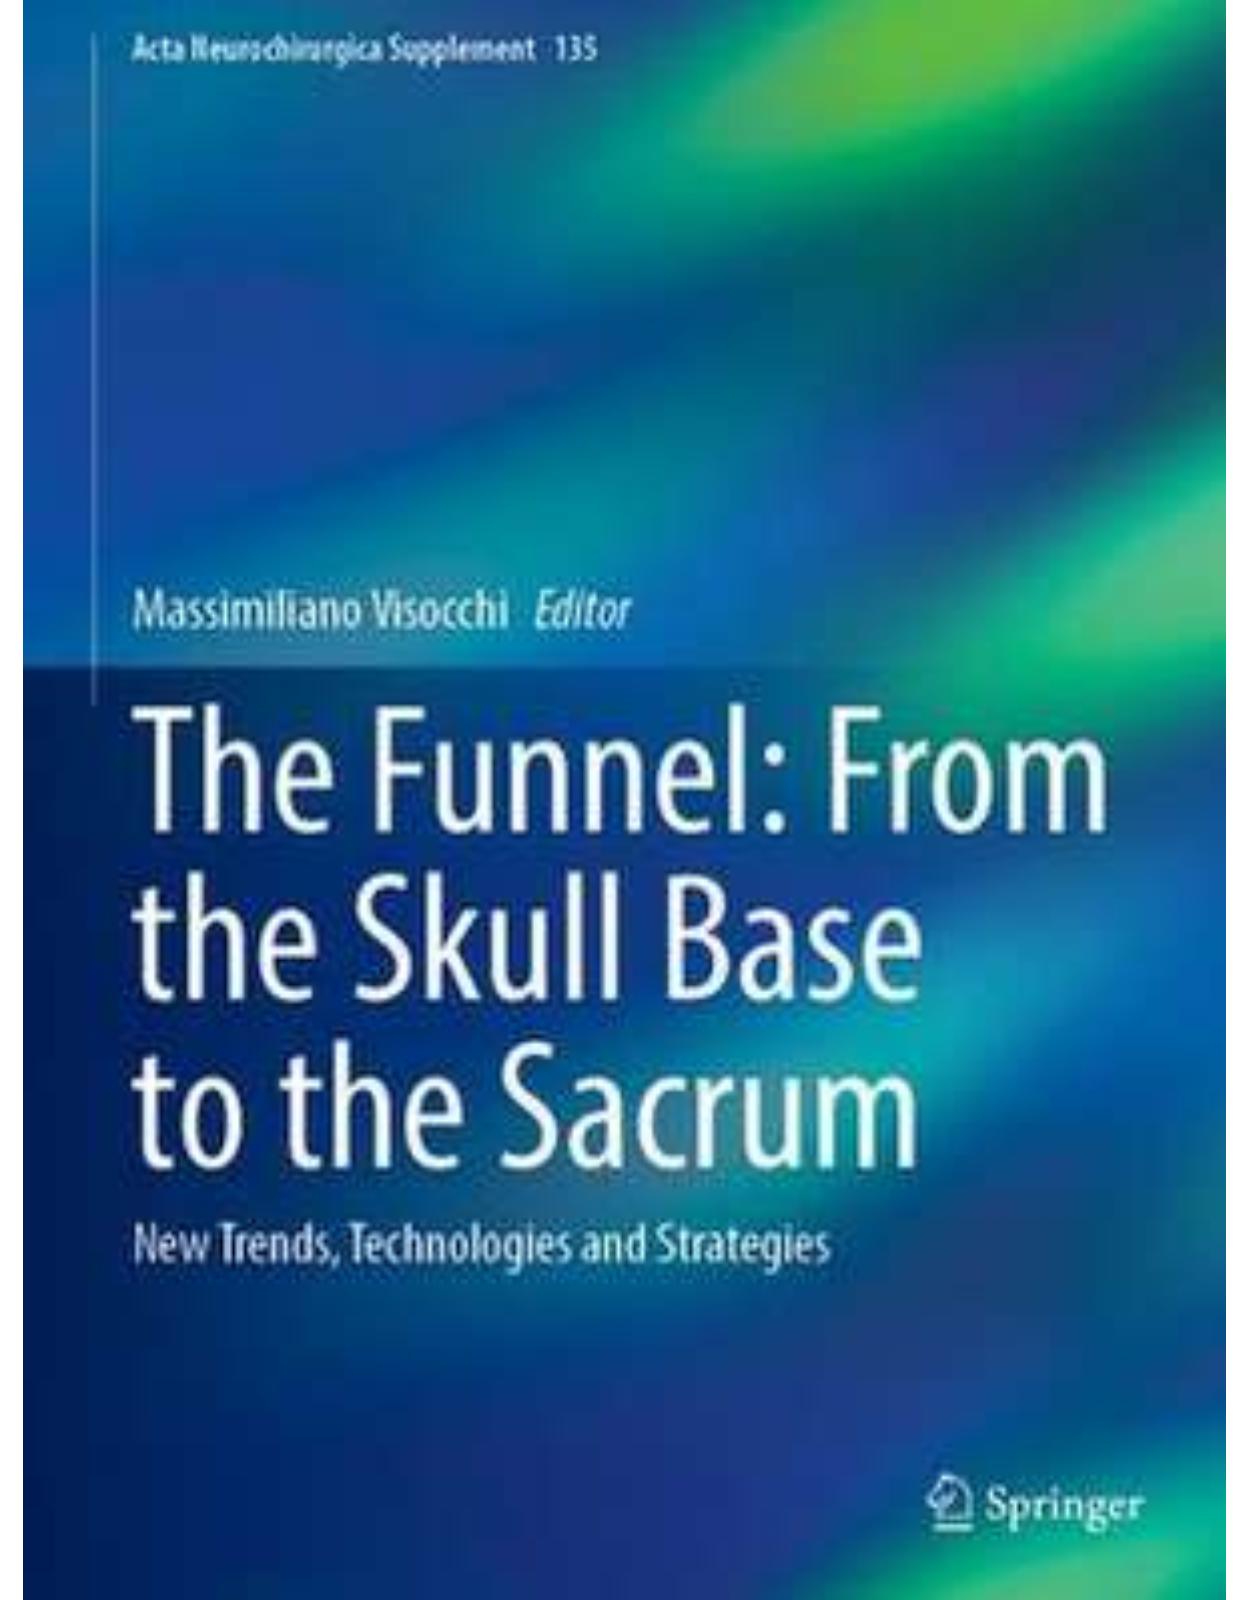 The Funnel: From the Skull Base to the Sacrum: New Trends, Technologies and Strategies